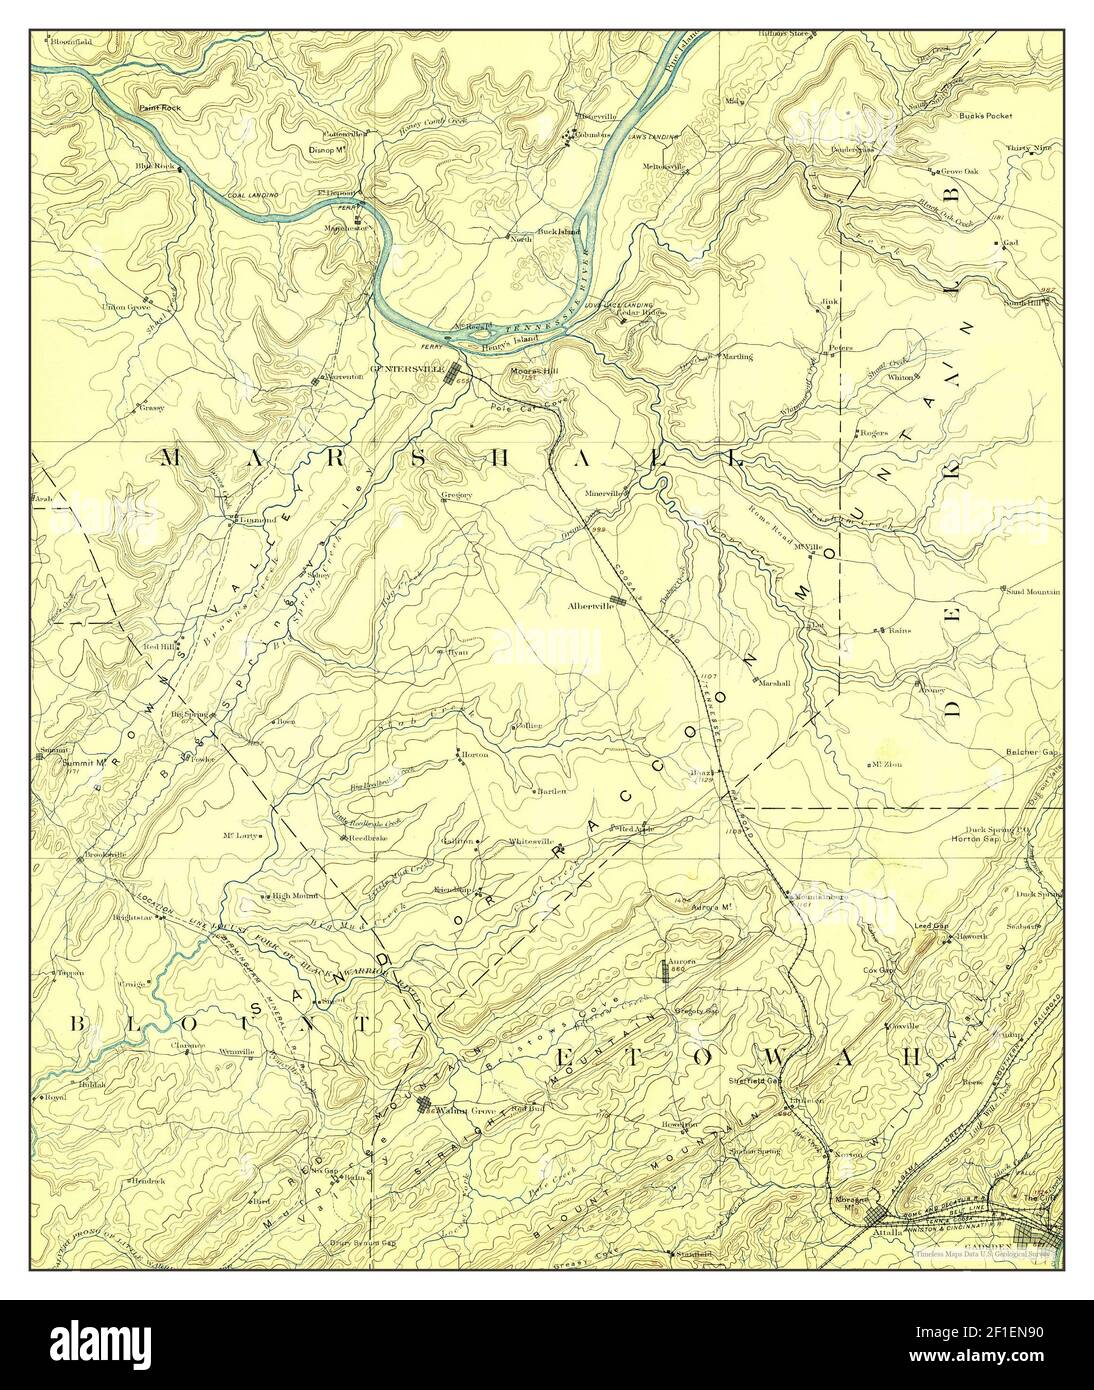 Gadsden Alabama Map 1892 1125000 United States Of America By Timeless Maps Data Us 4920